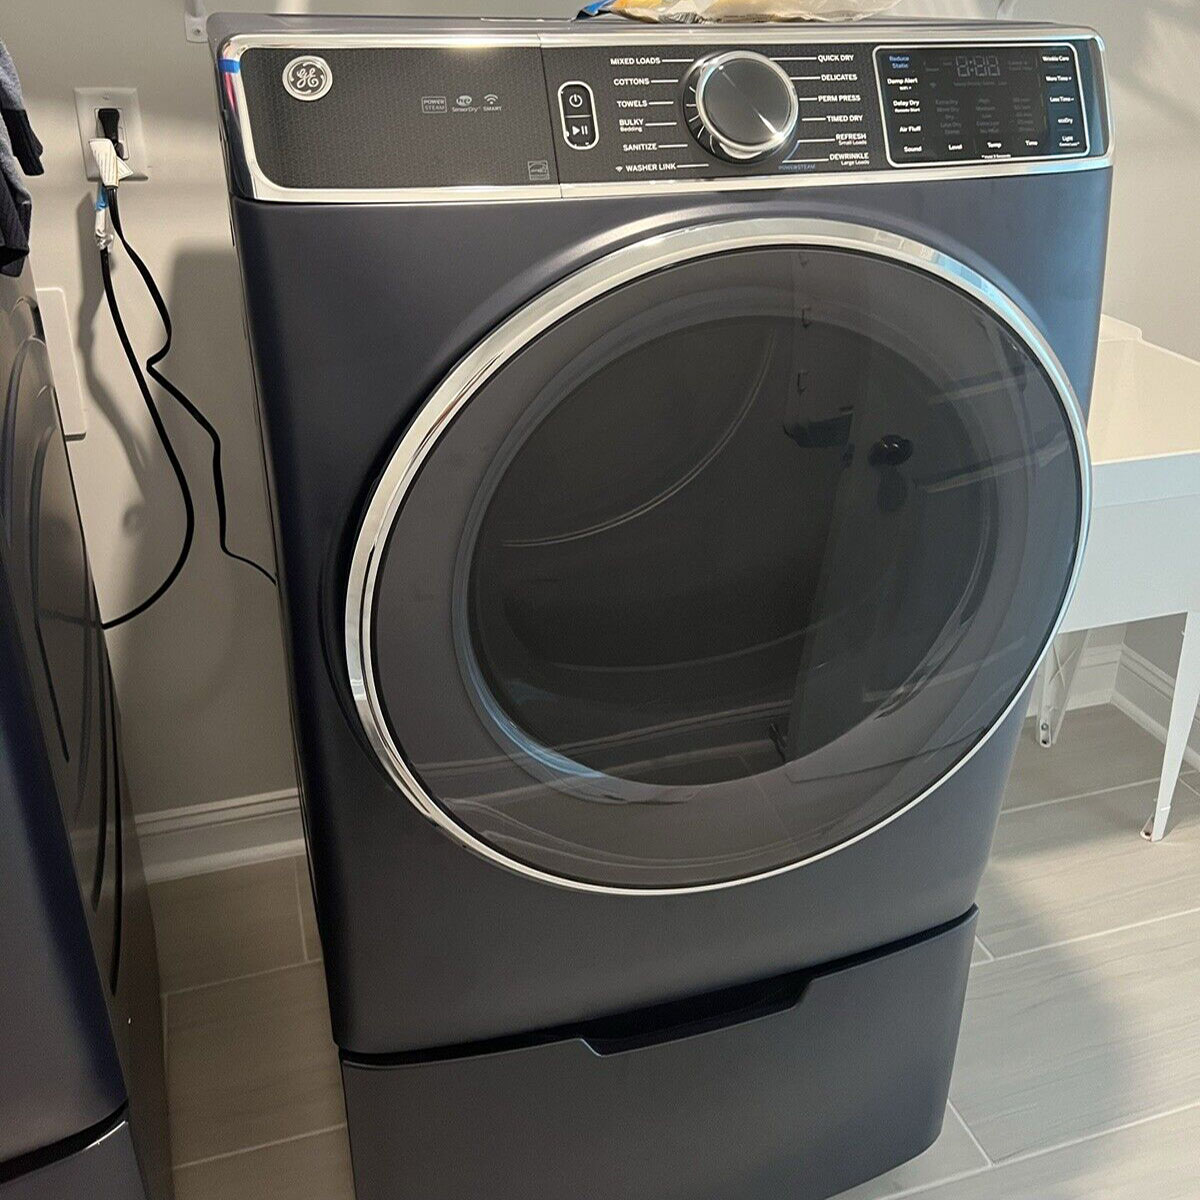 How To Fix The Error Code E71 For GE Washing Machine